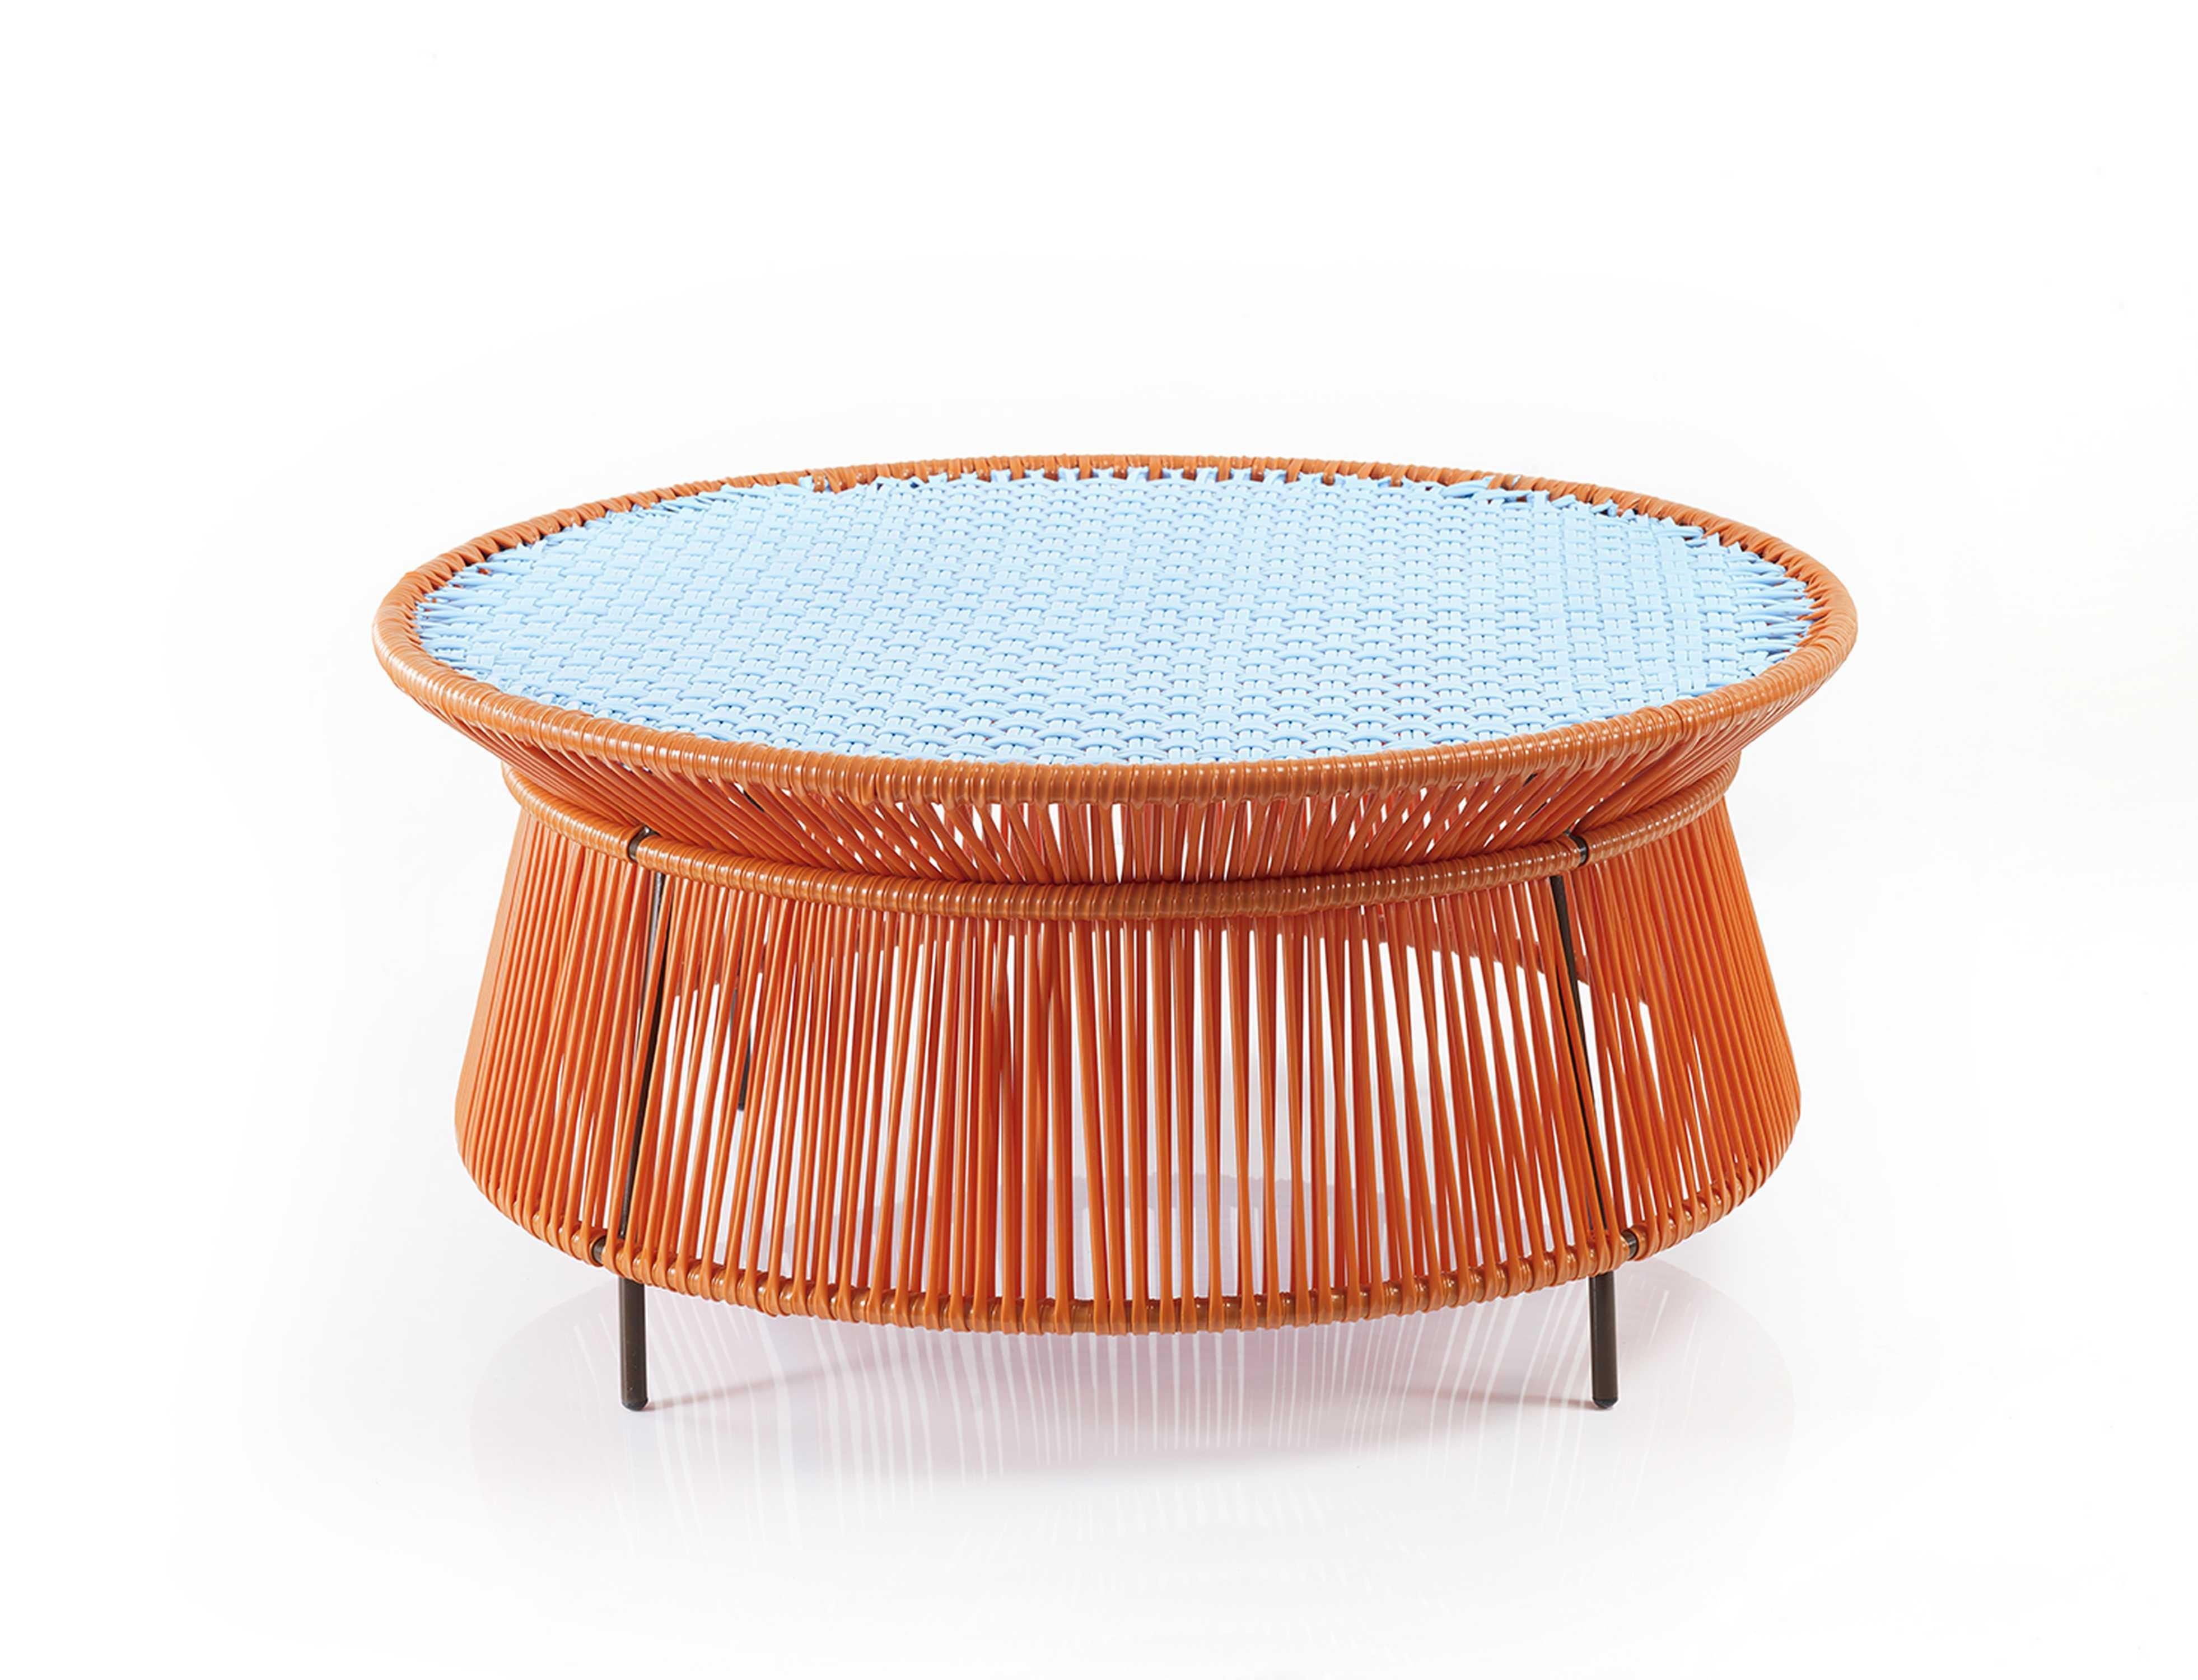 Orange mint caribe low table by Sebastian Herkner
Materials: Galvanized and powder-coated tubular steel. PVC strings are made from recycled plastic.
Technique: Made from recycled plastic and weaved by local craftspeople in Colombia. 
Dimensions: